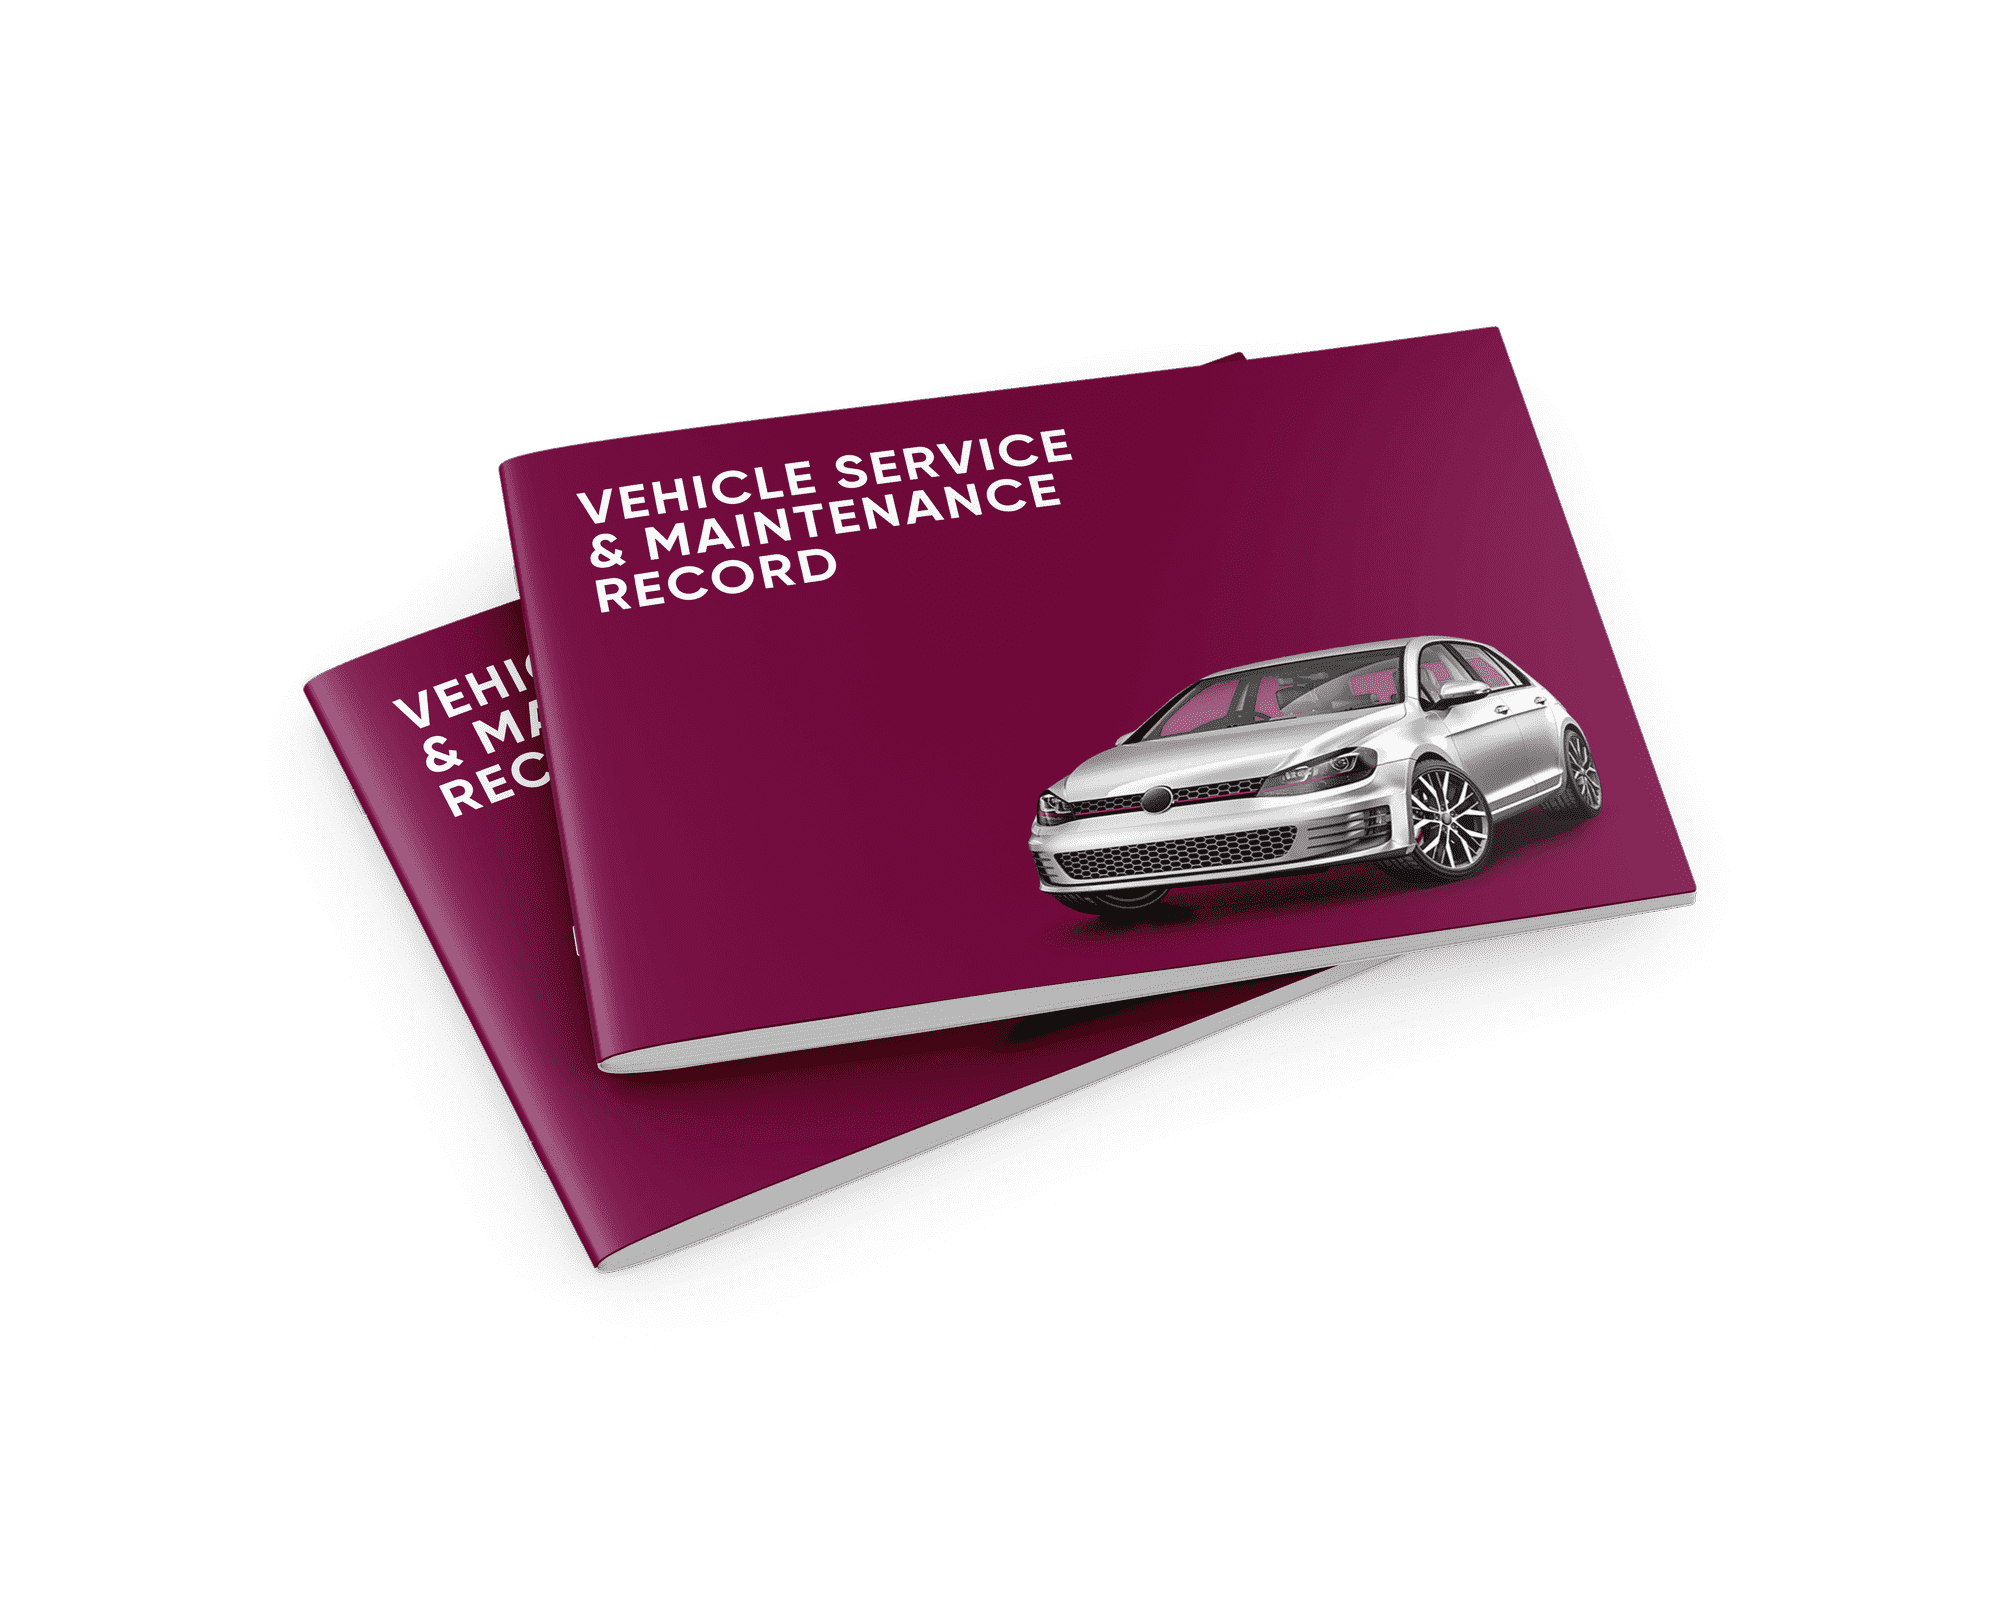 Vehicle service and maintenance history record book